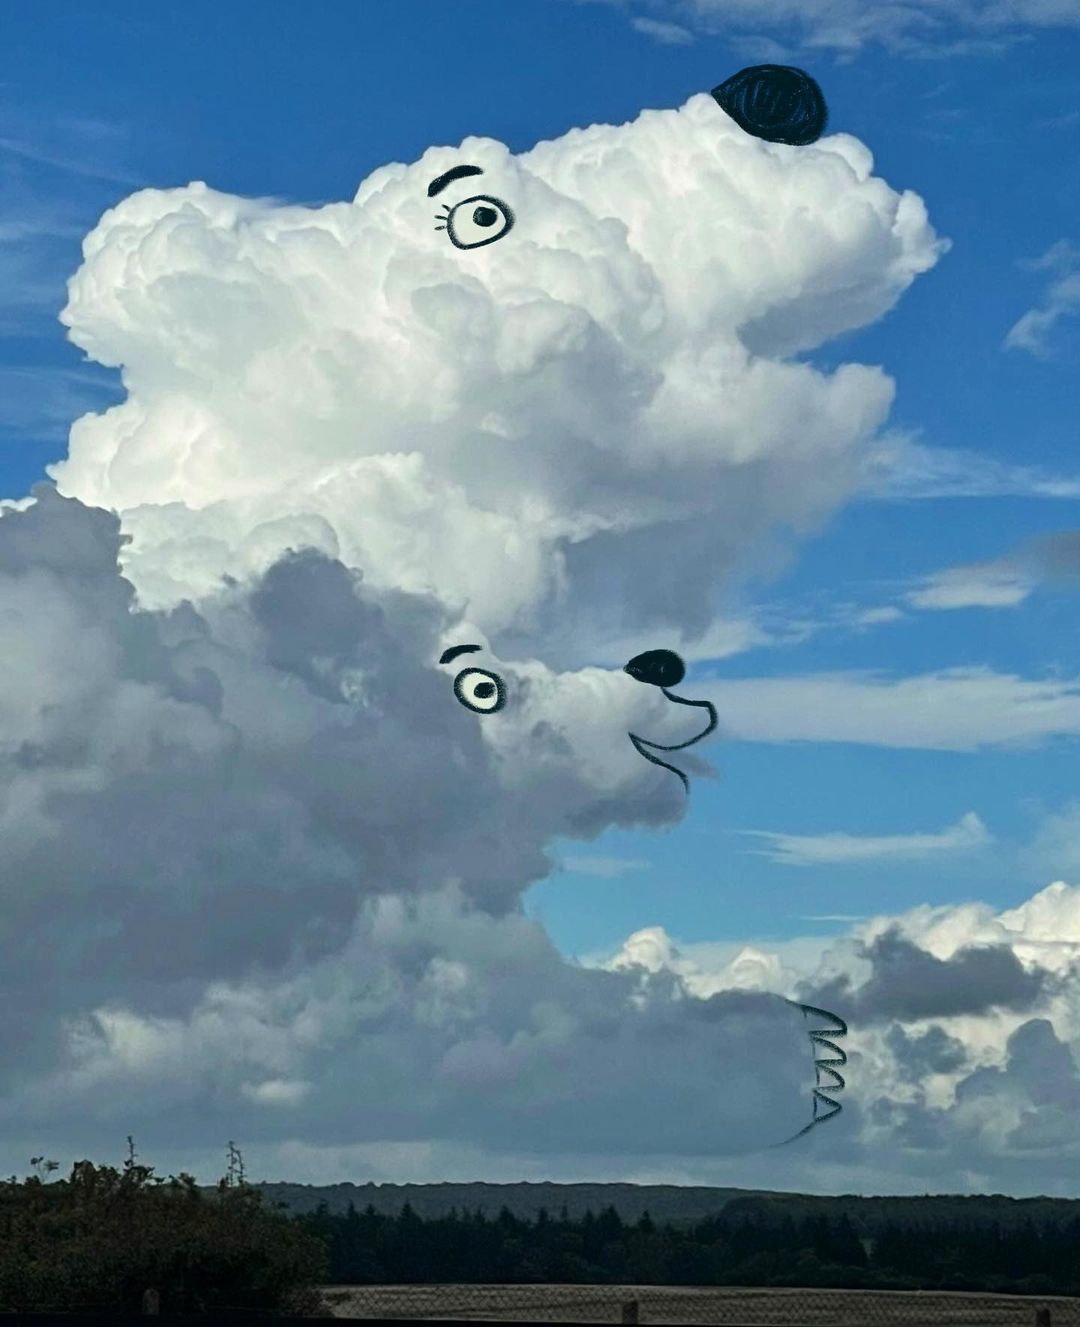 Clouds Turned Into Amusing Characters By Chris Judge (13)